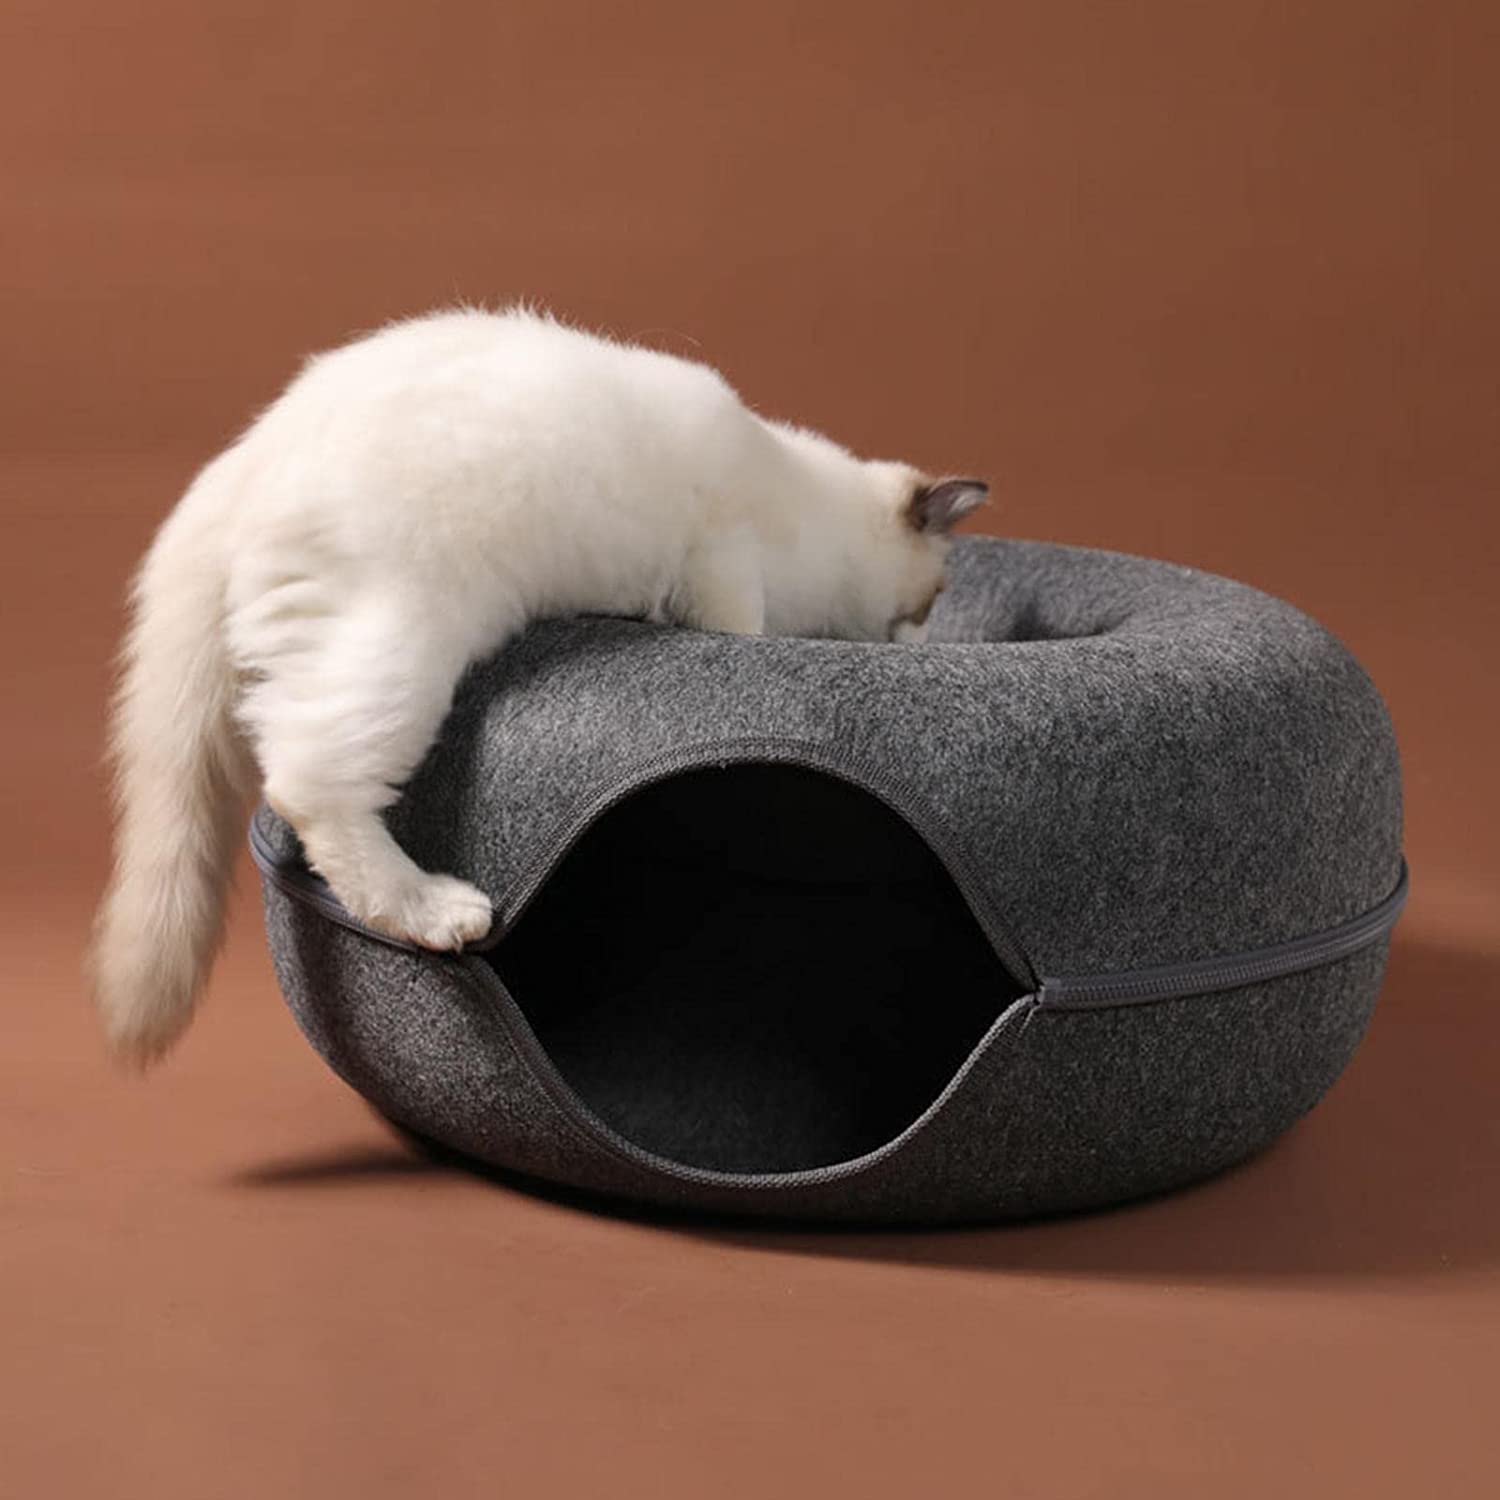 Cat Tunnel Bed for Indoor Cat - Buy Cat Tunnel Bed for Indoor Cat in Dubai - HOCC Dubai - Baby playground outdoor - Shop baby product - Shop Pet product - shop home decor and lighting